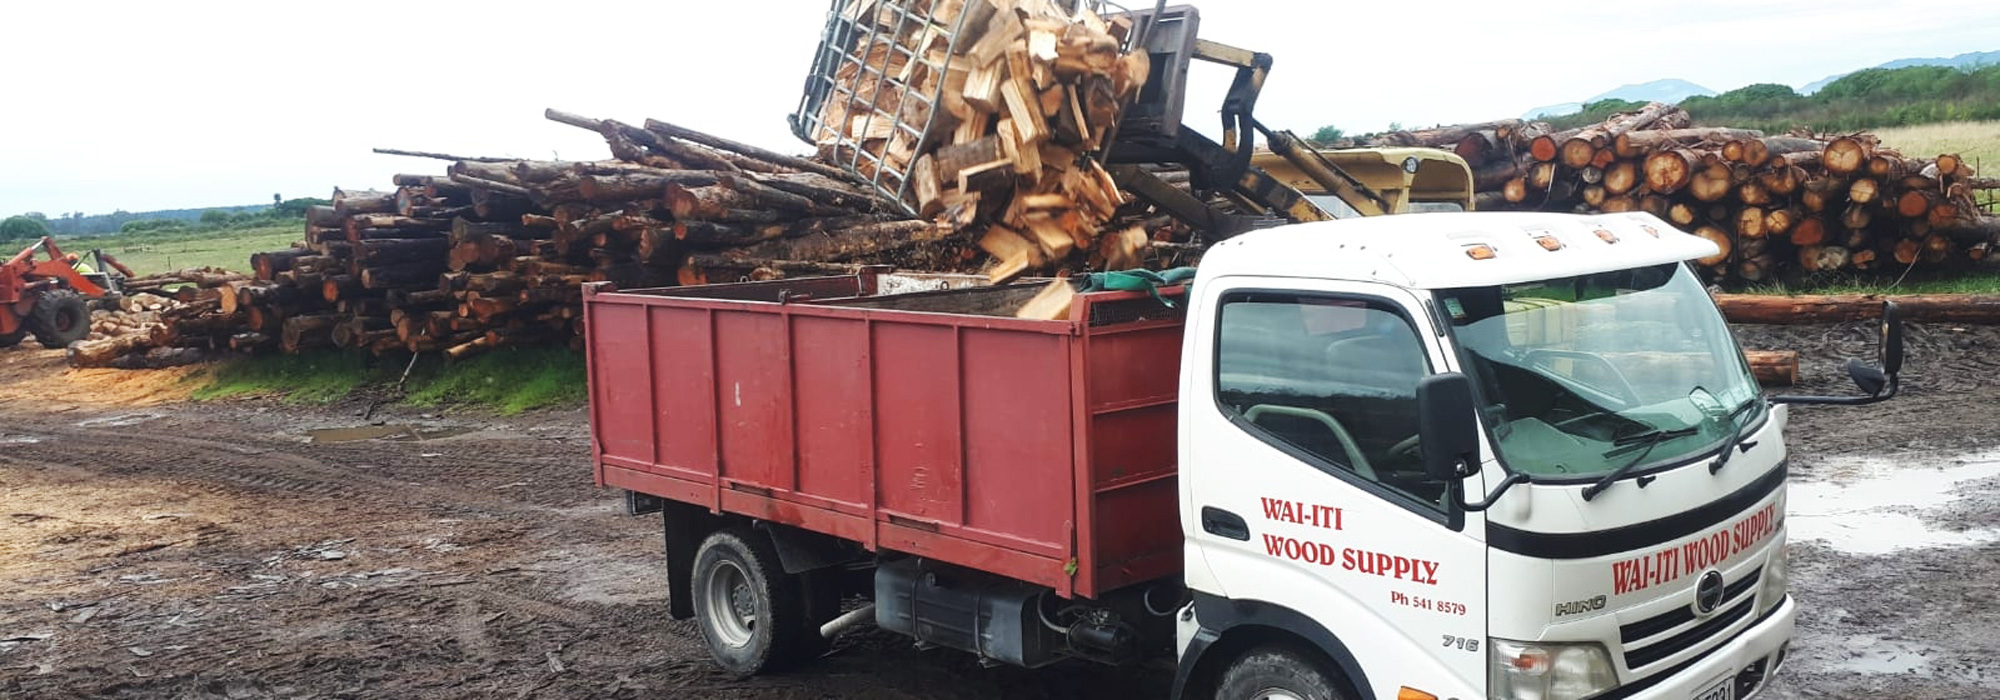 Wai-iti Wood Supply, supply Tasman and Nelson with great firewood